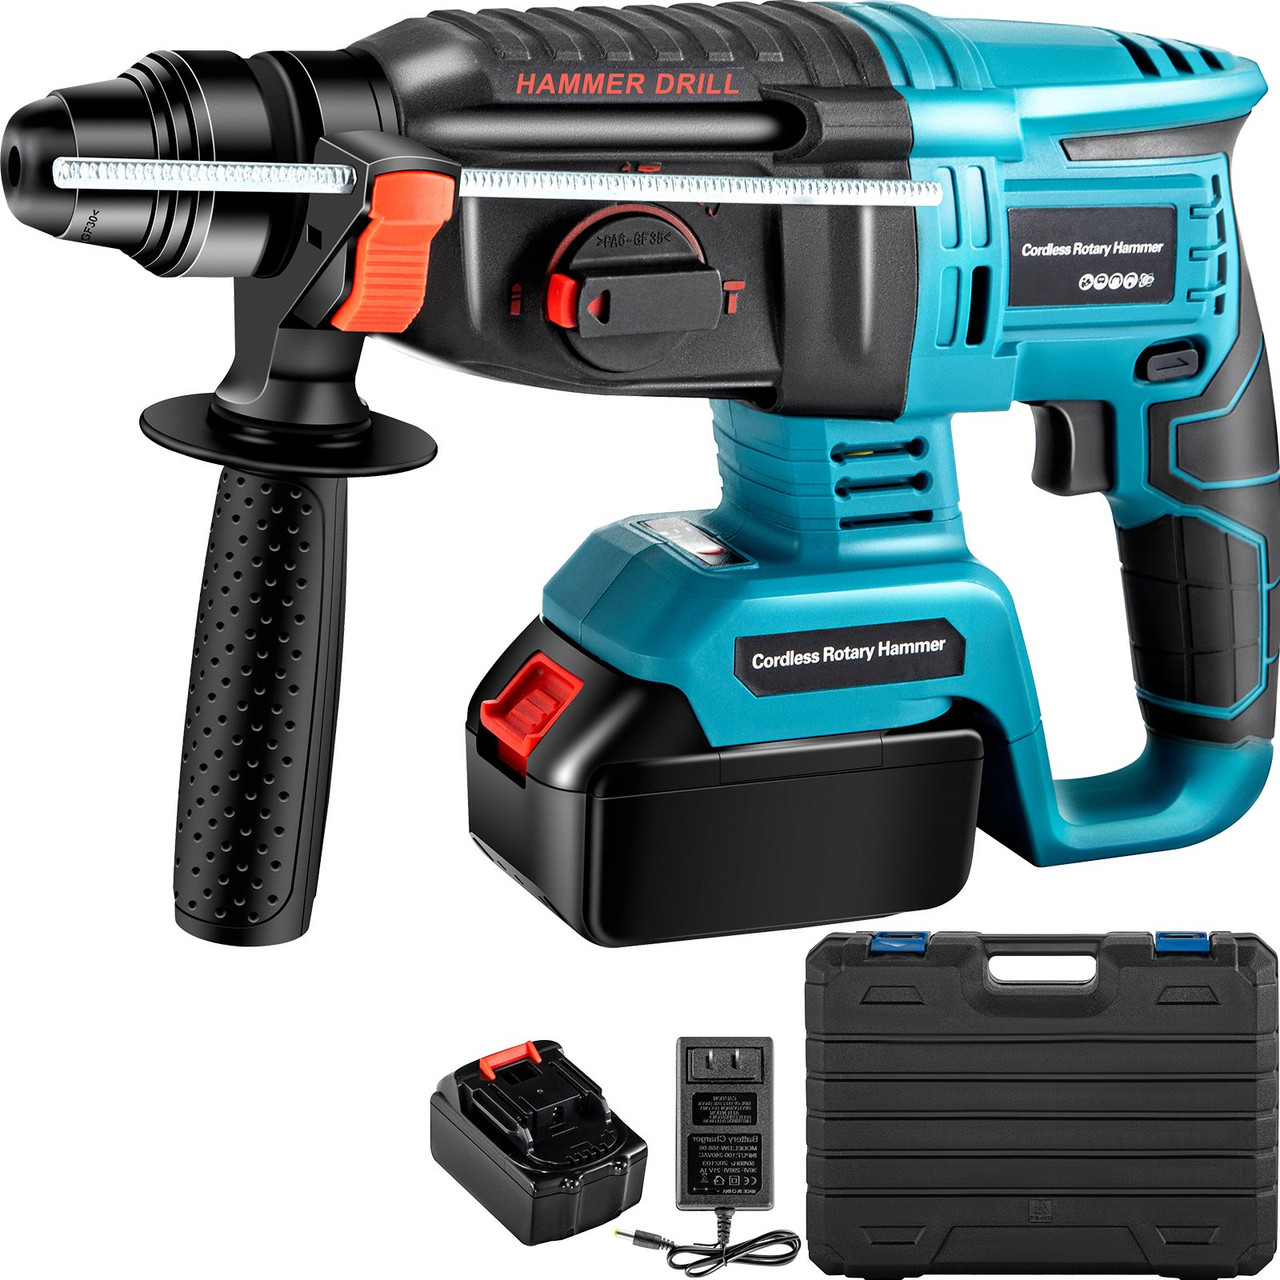 SDS-Plus Rotary Hammer Drill, 1400 rpm & 450 bpm Variable Speed Electric Hammer, 4 IN 1 Cordless Drill, Measurable Hammer Ideal with 1 for Concrete, Steel, and Wood